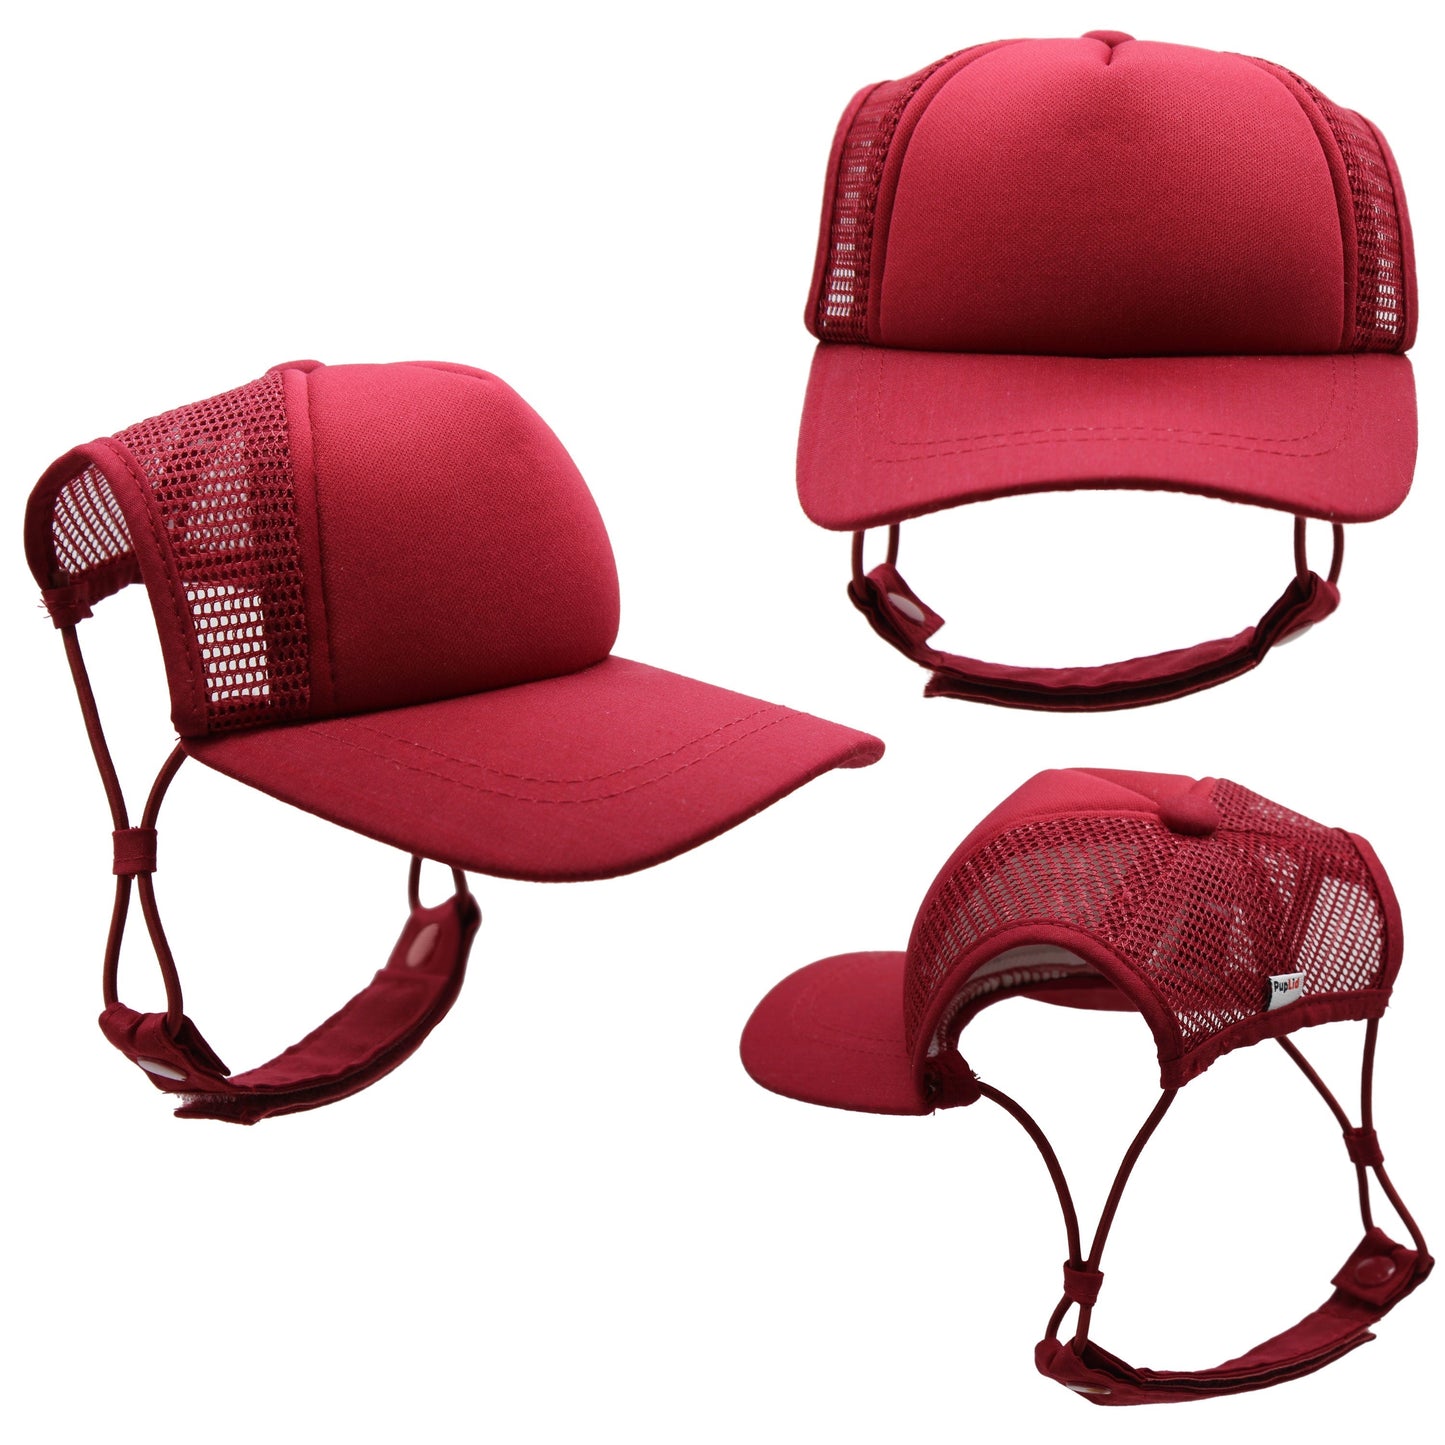 Blank PupLid Trucker Hats - Solid Colors - All Sizes